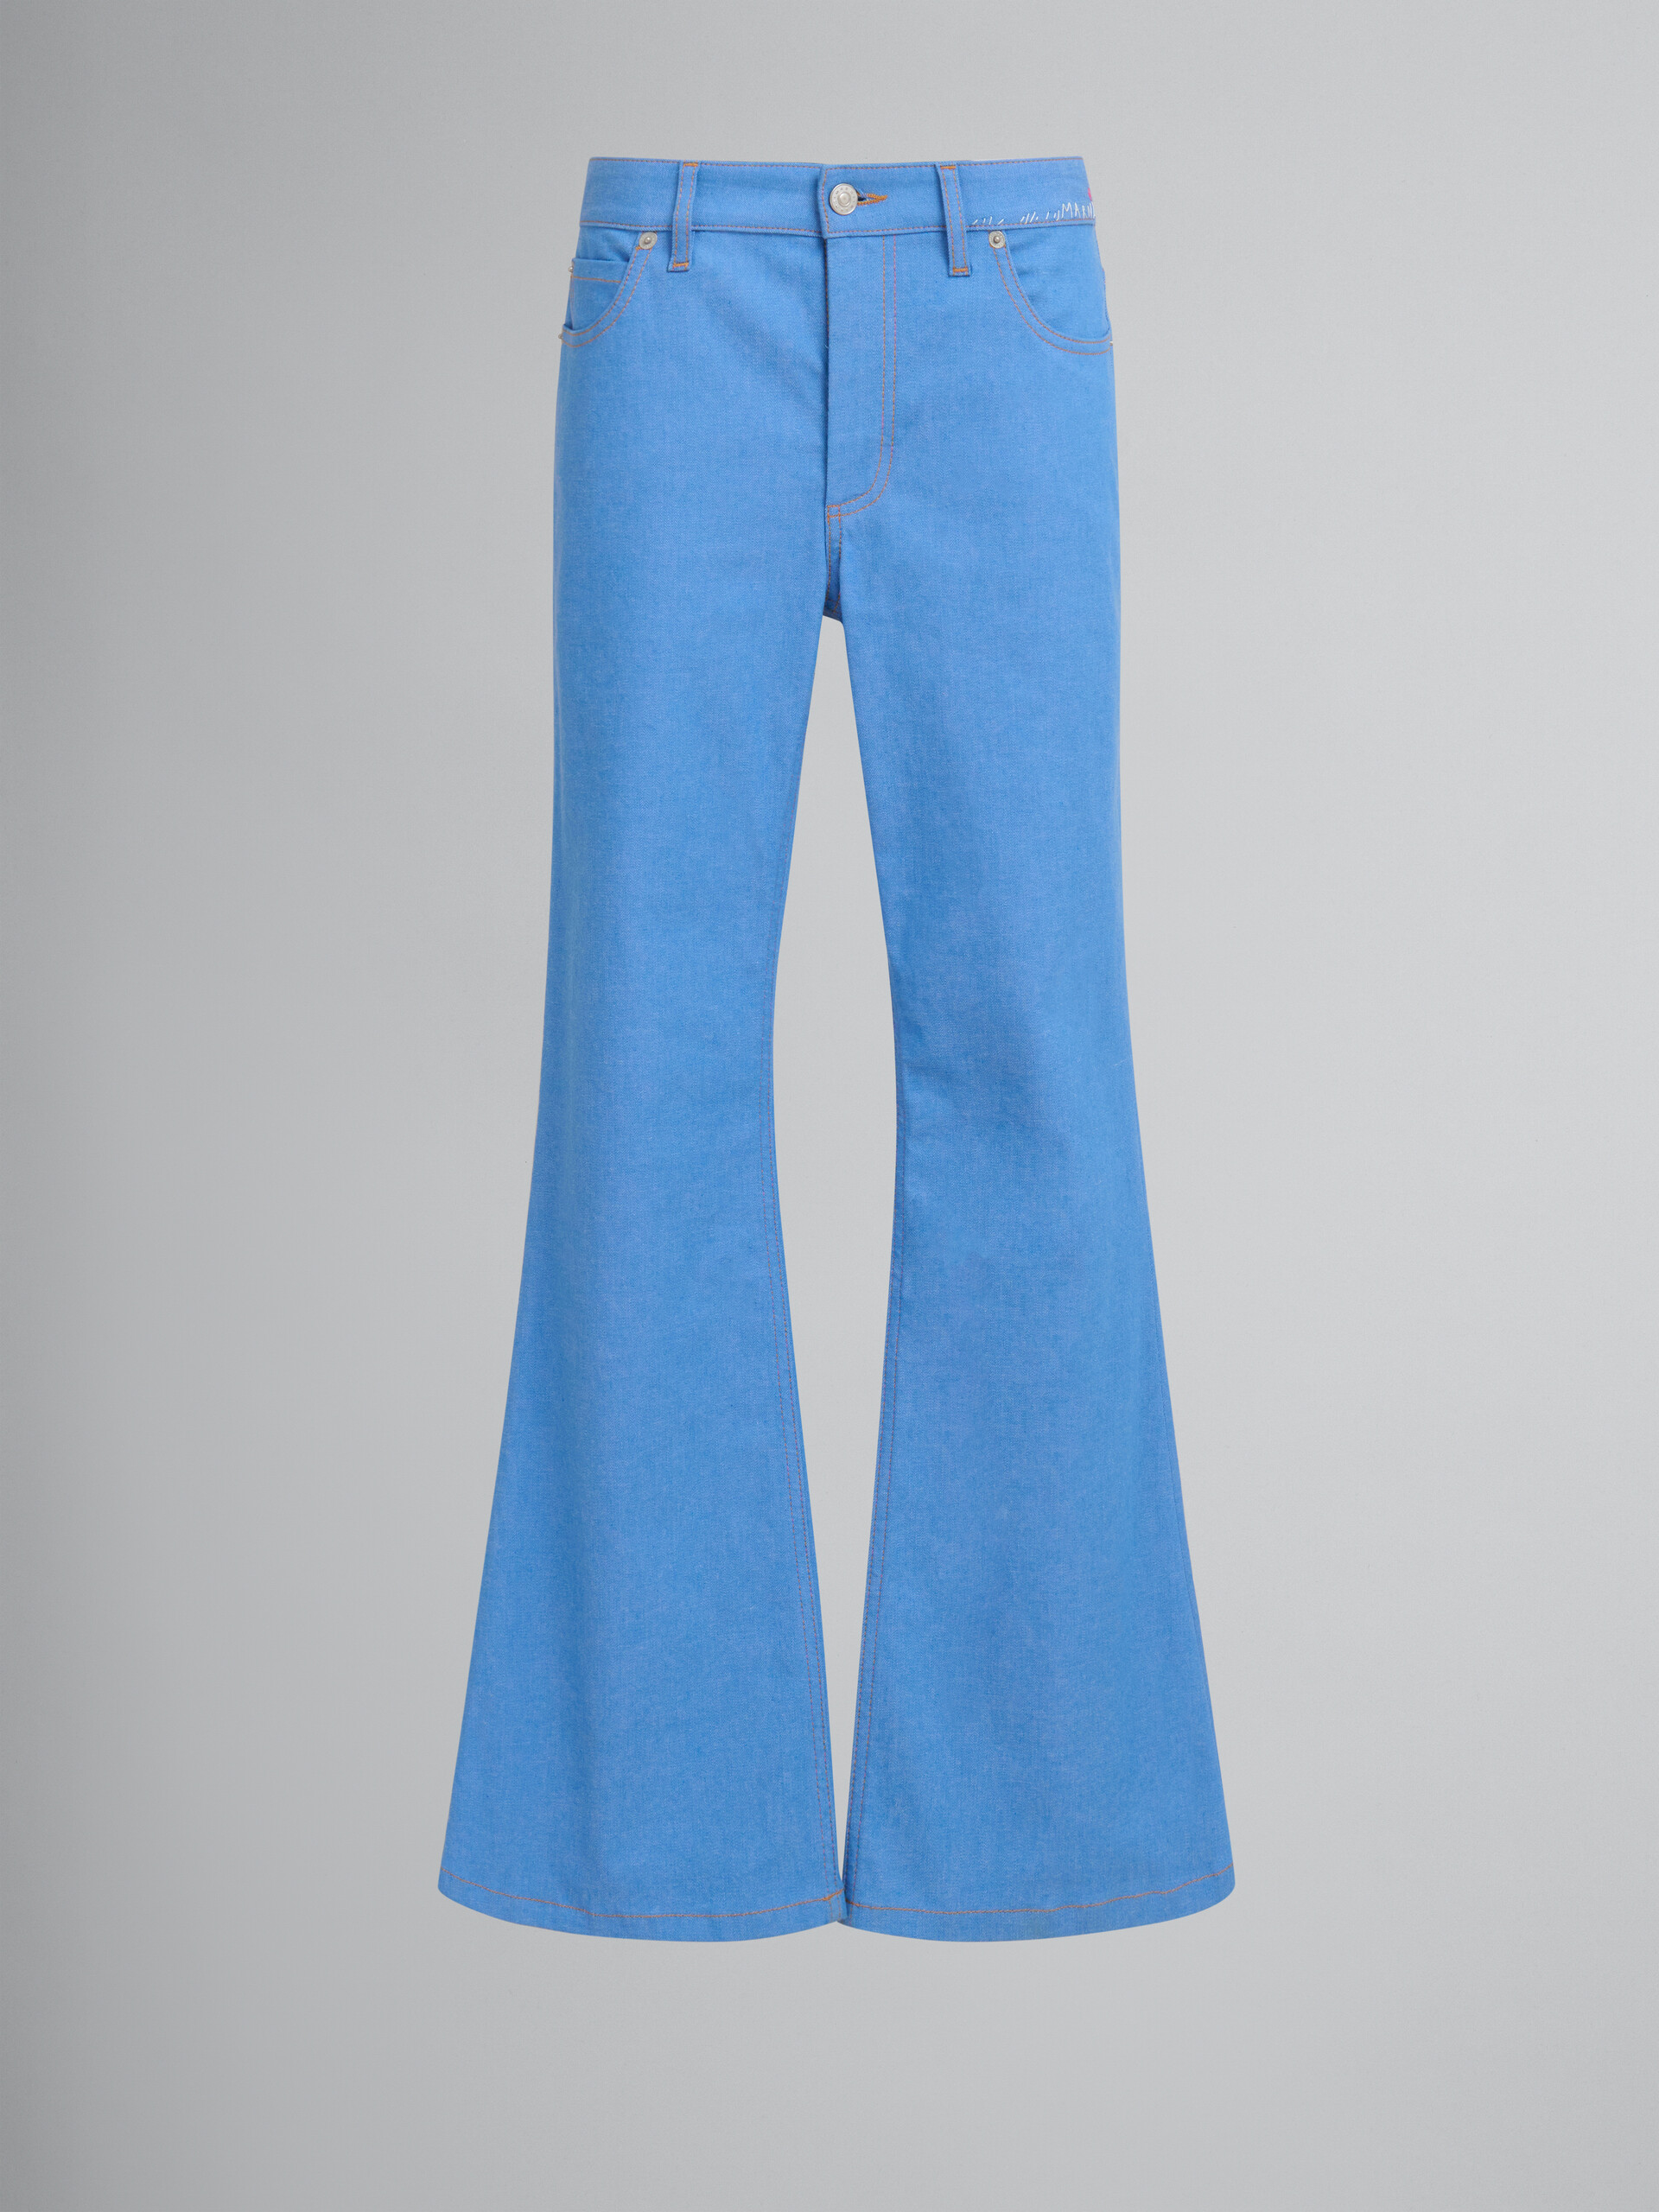 Blue stretch denim flared trousers - Pants - Image 1